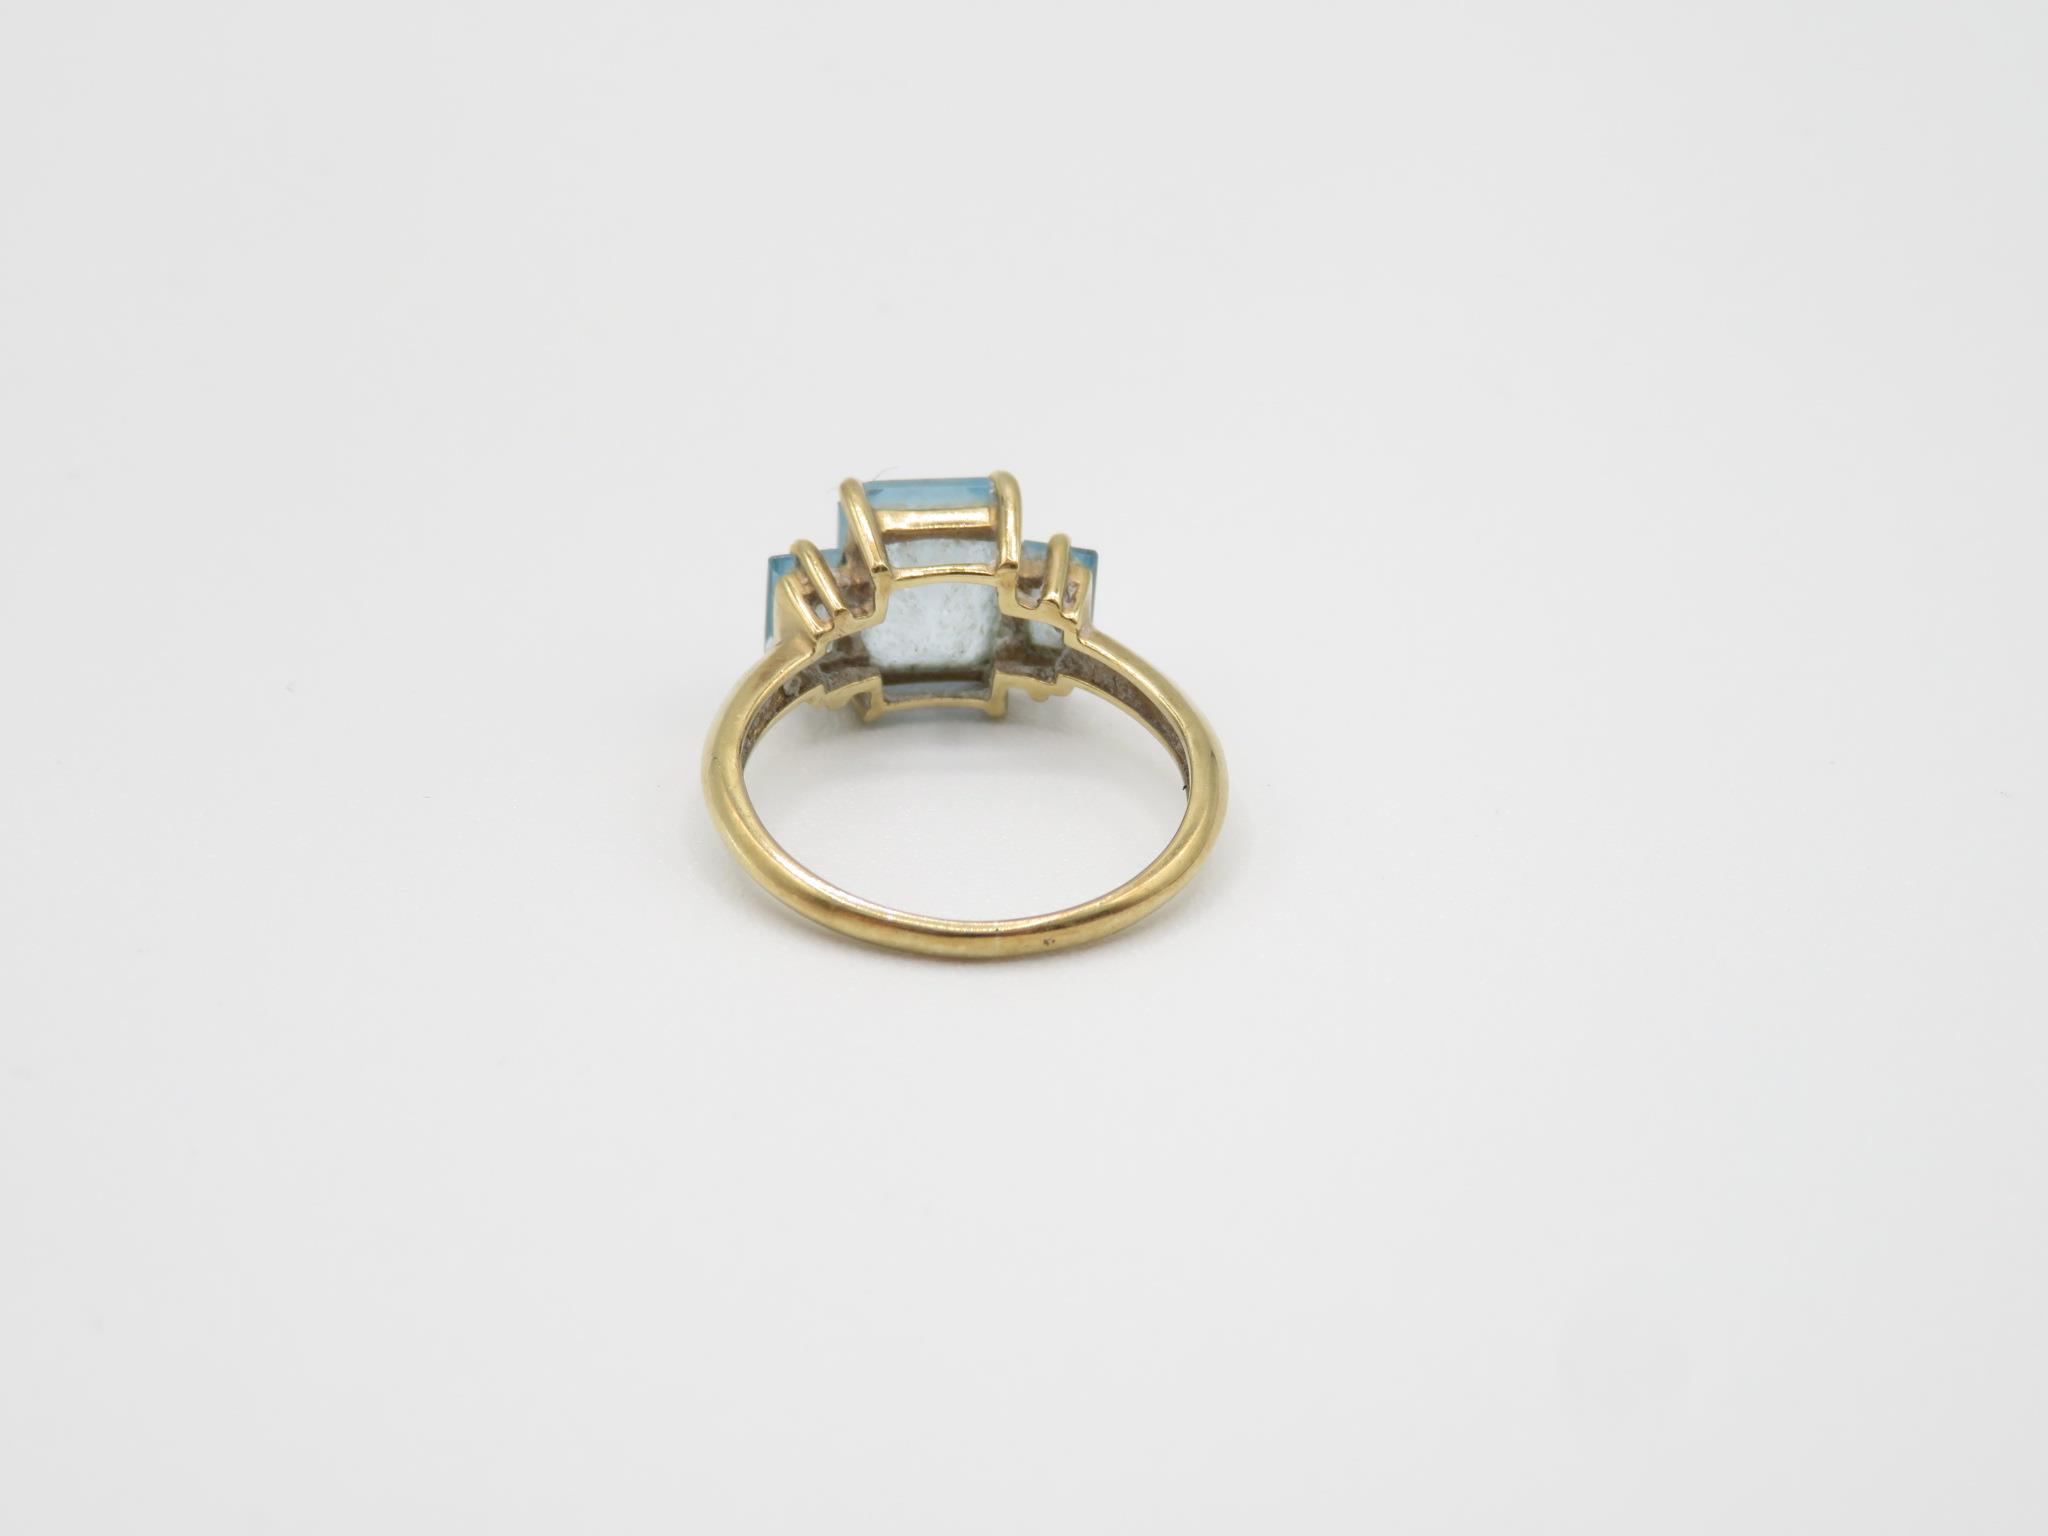 9ct Gold Blue Topaz Three Stone Ring (2.6g) Size L - Image 5 of 5